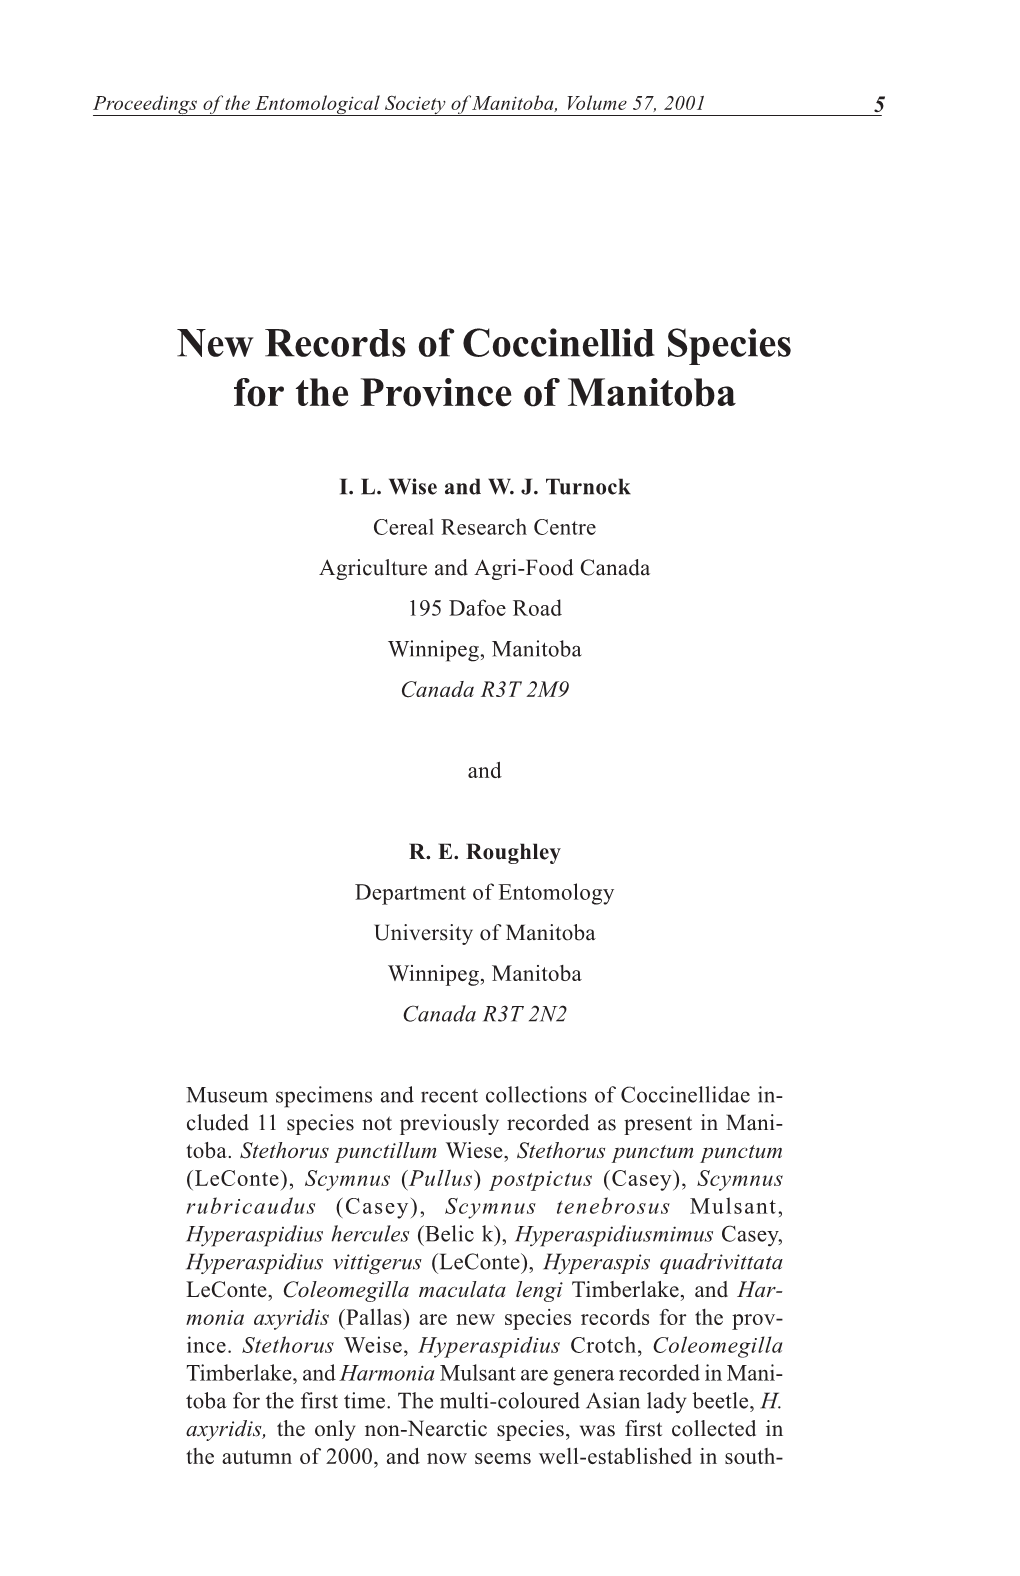 New Records of Coccinellid Species for the Province of Manitoba